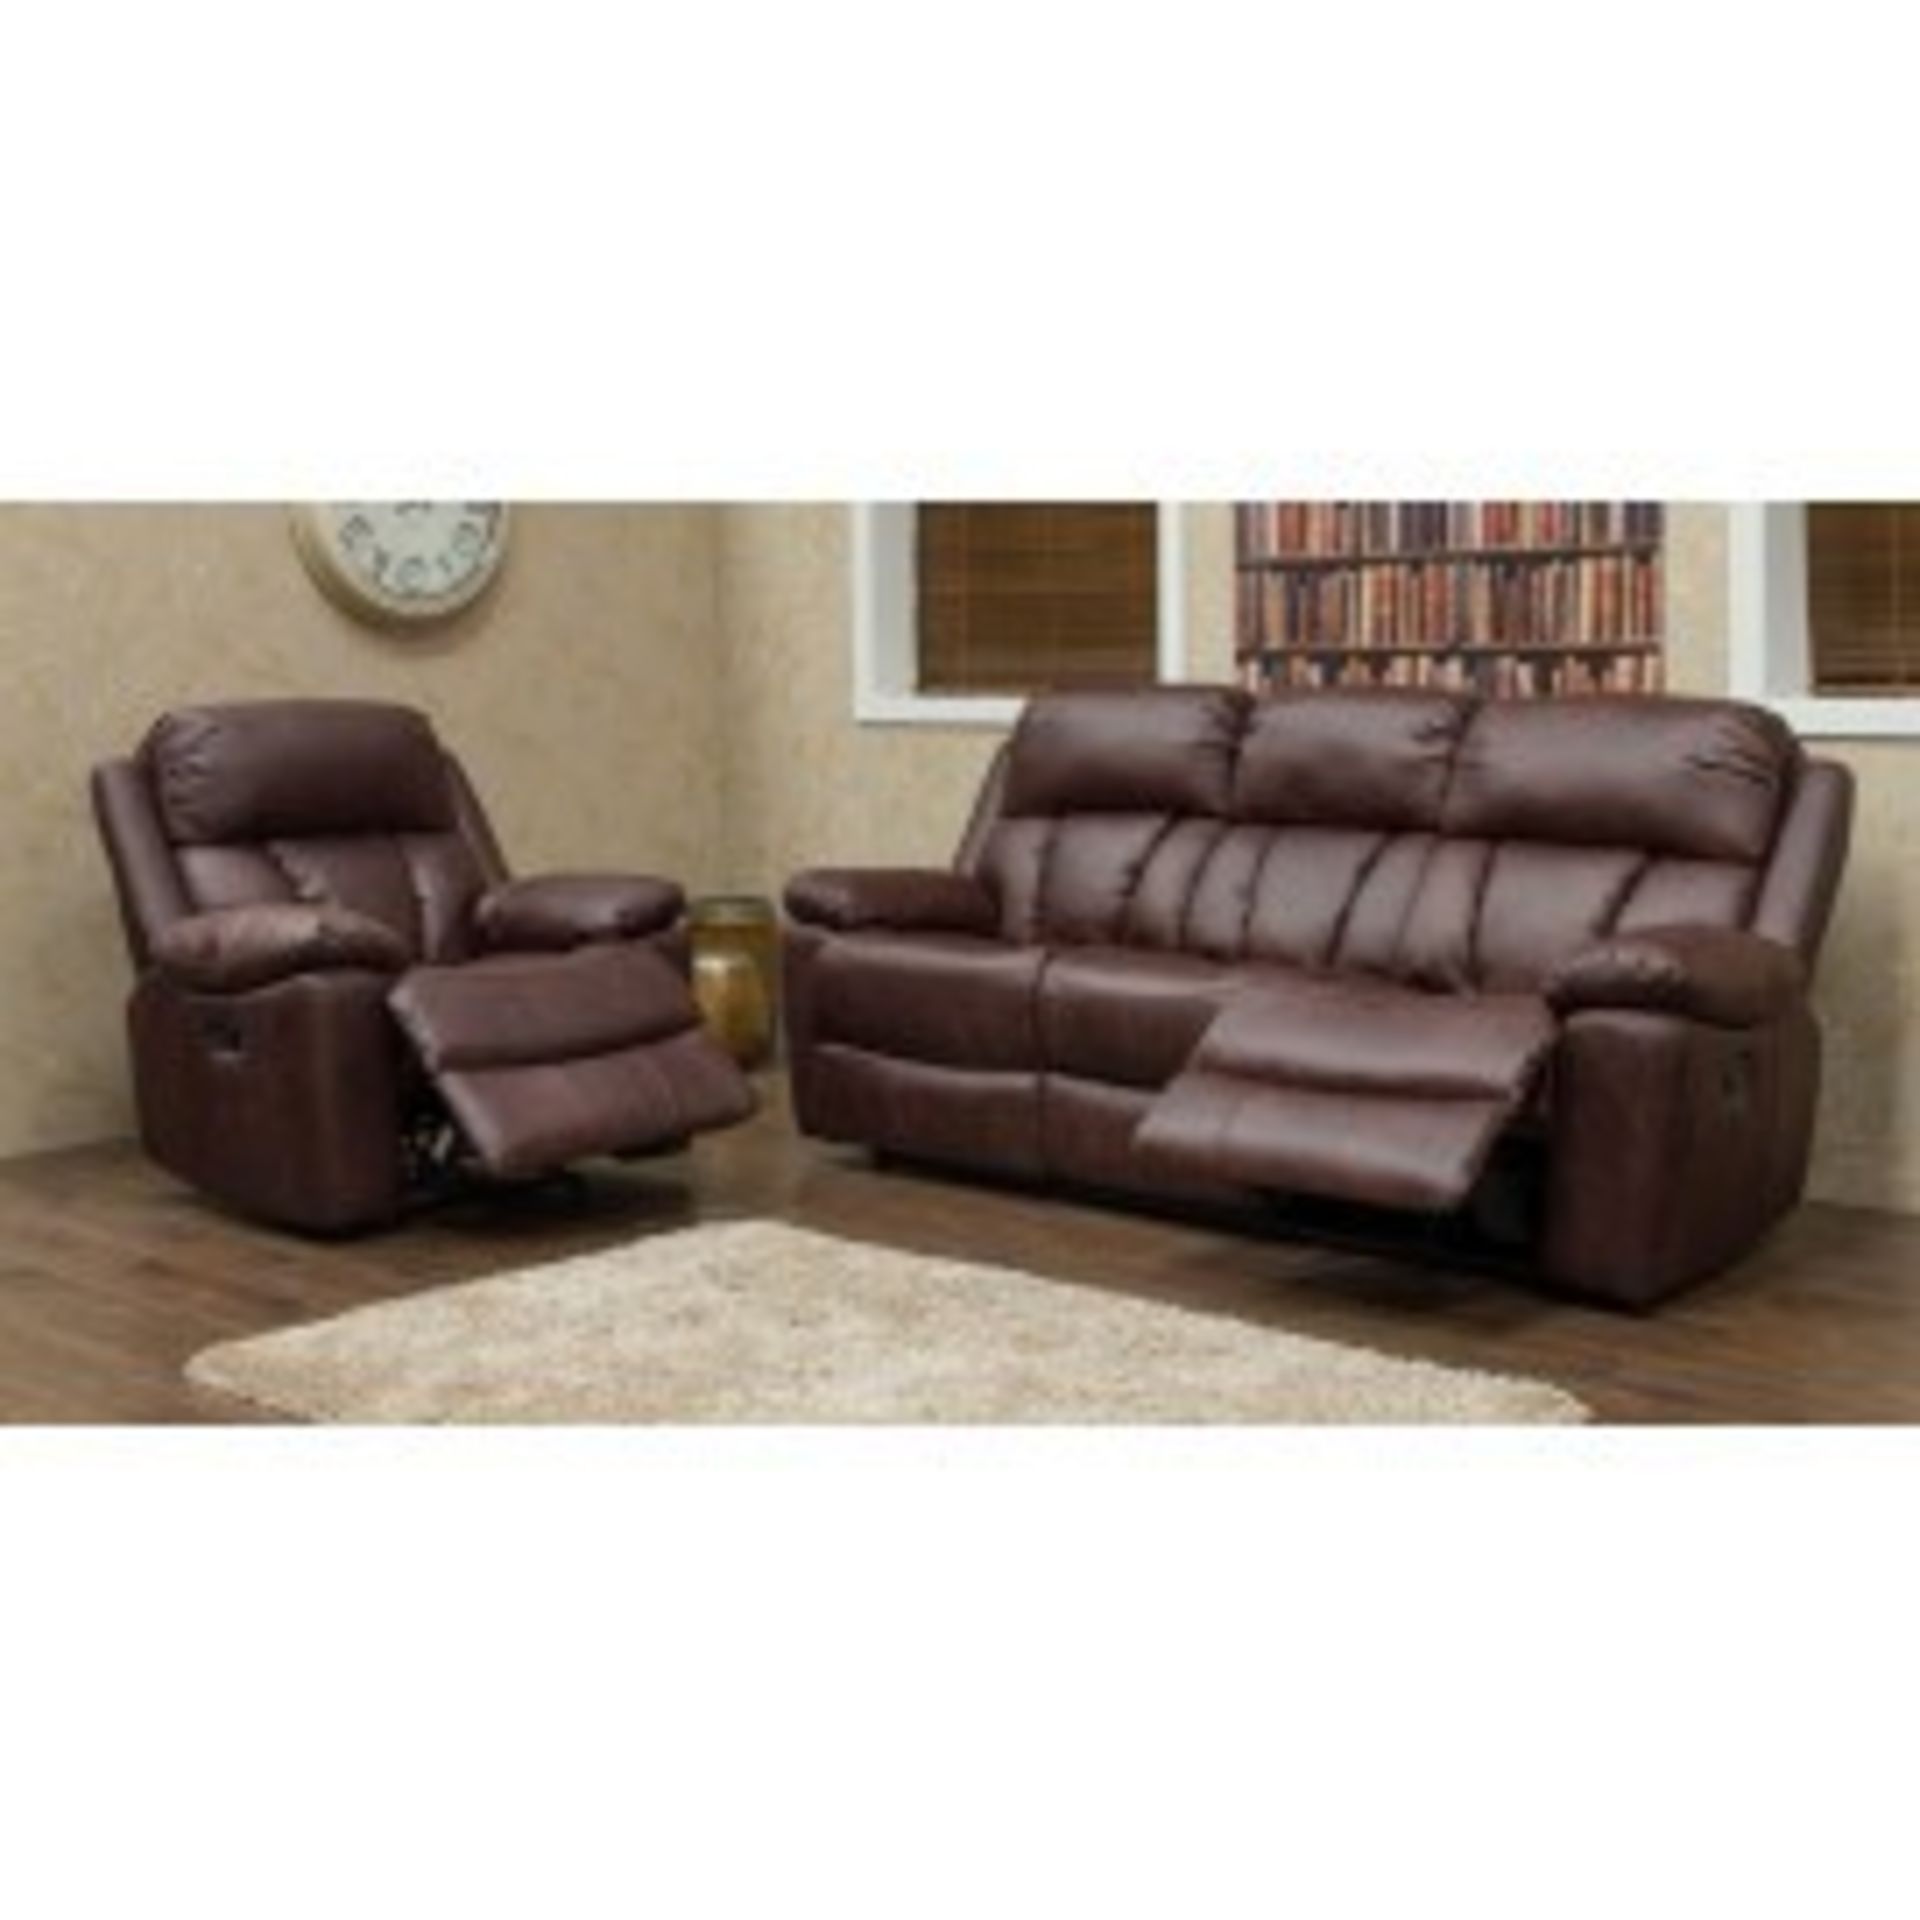 Brand New Boxed Benson 3 Seater Brown Leatheraire Reclining Sofa Plus 2 Matching Arm Chairs - Image 3 of 3